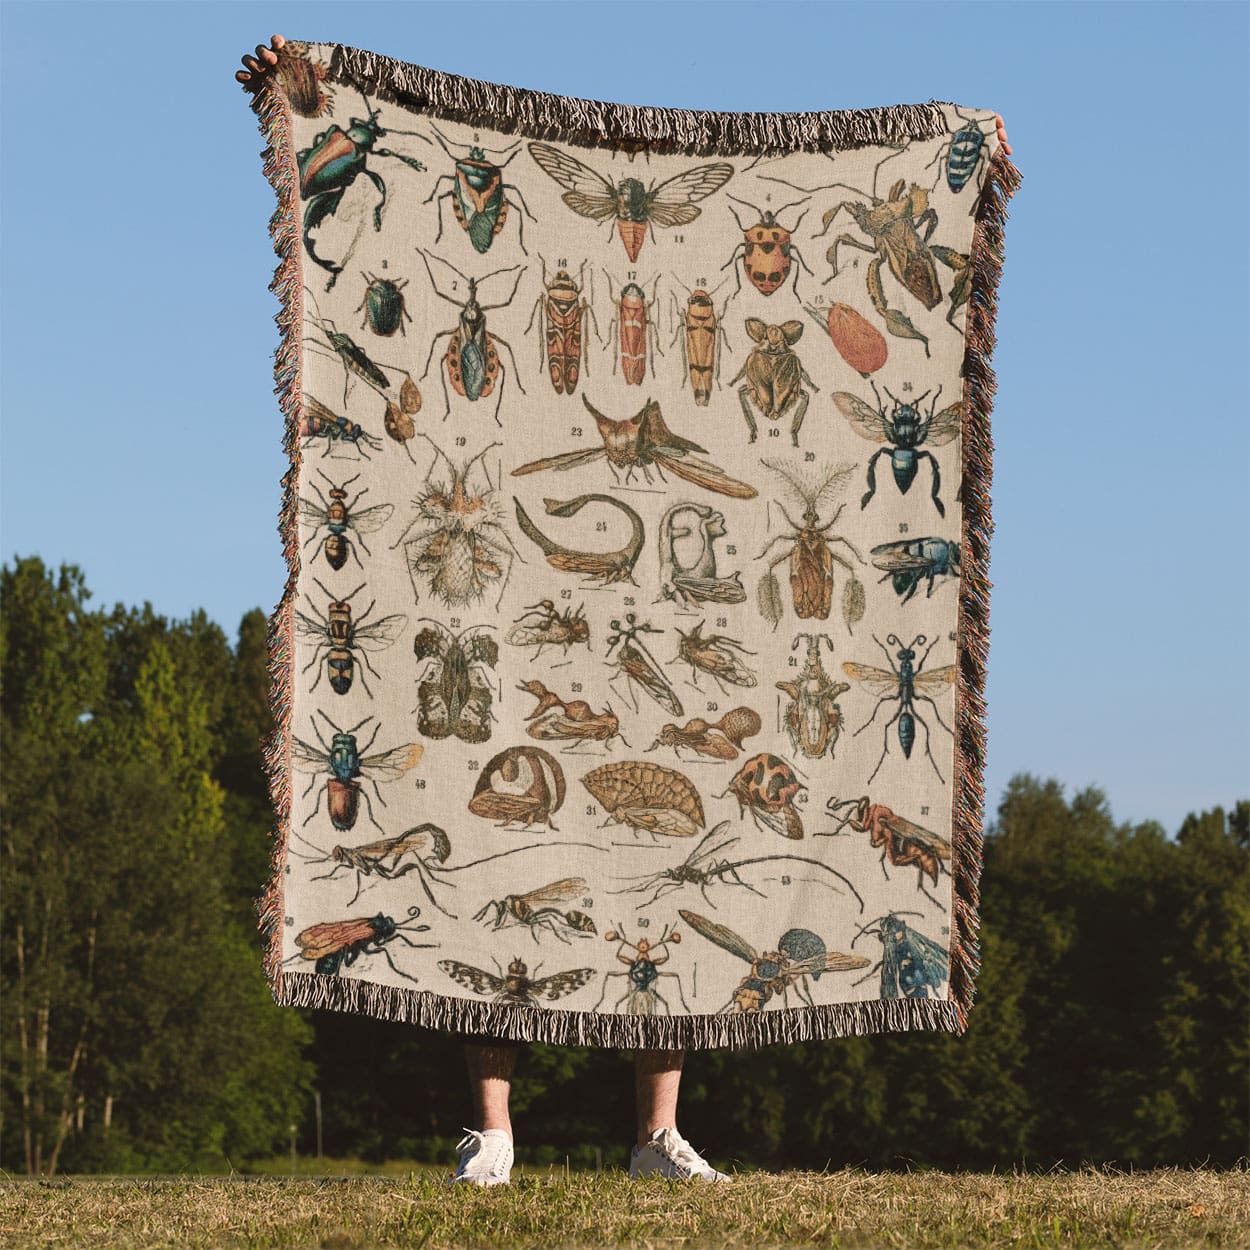 Bugs and Insects Woven Blanket Held Up Outside